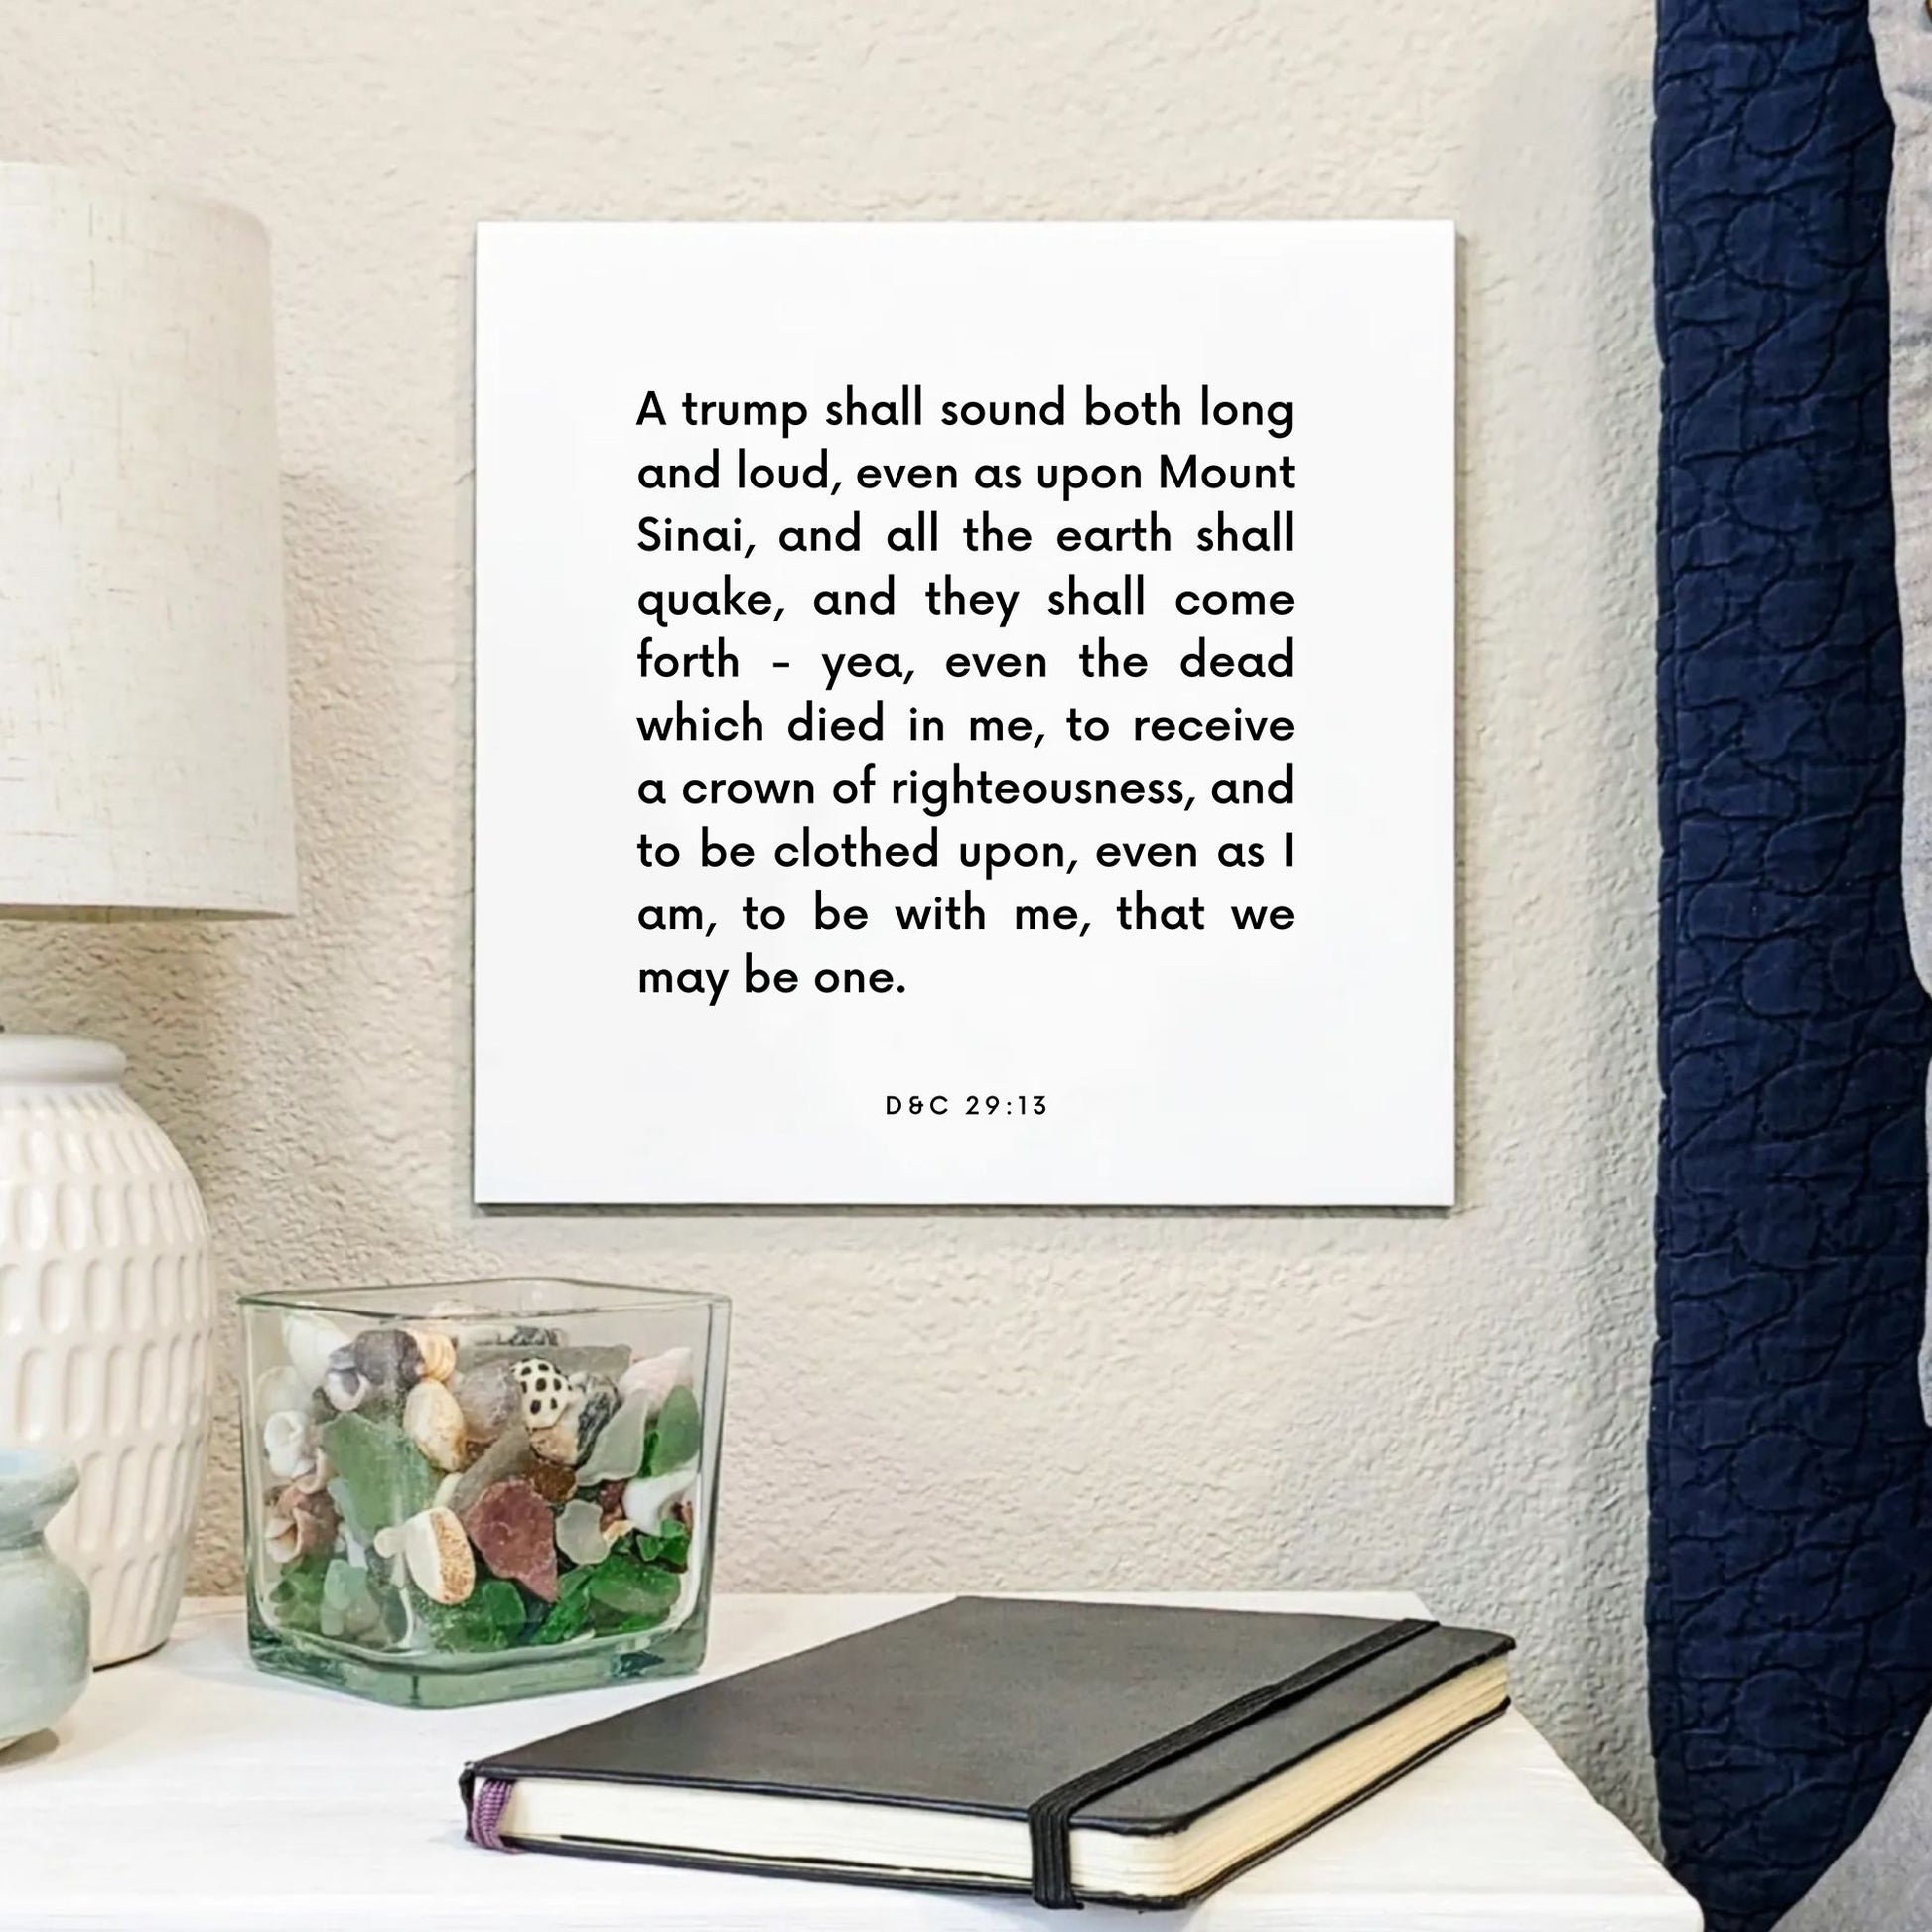 Bedside mouting of the scripture tile for D&C 29:13 - "A trump shall sound both long and loud"